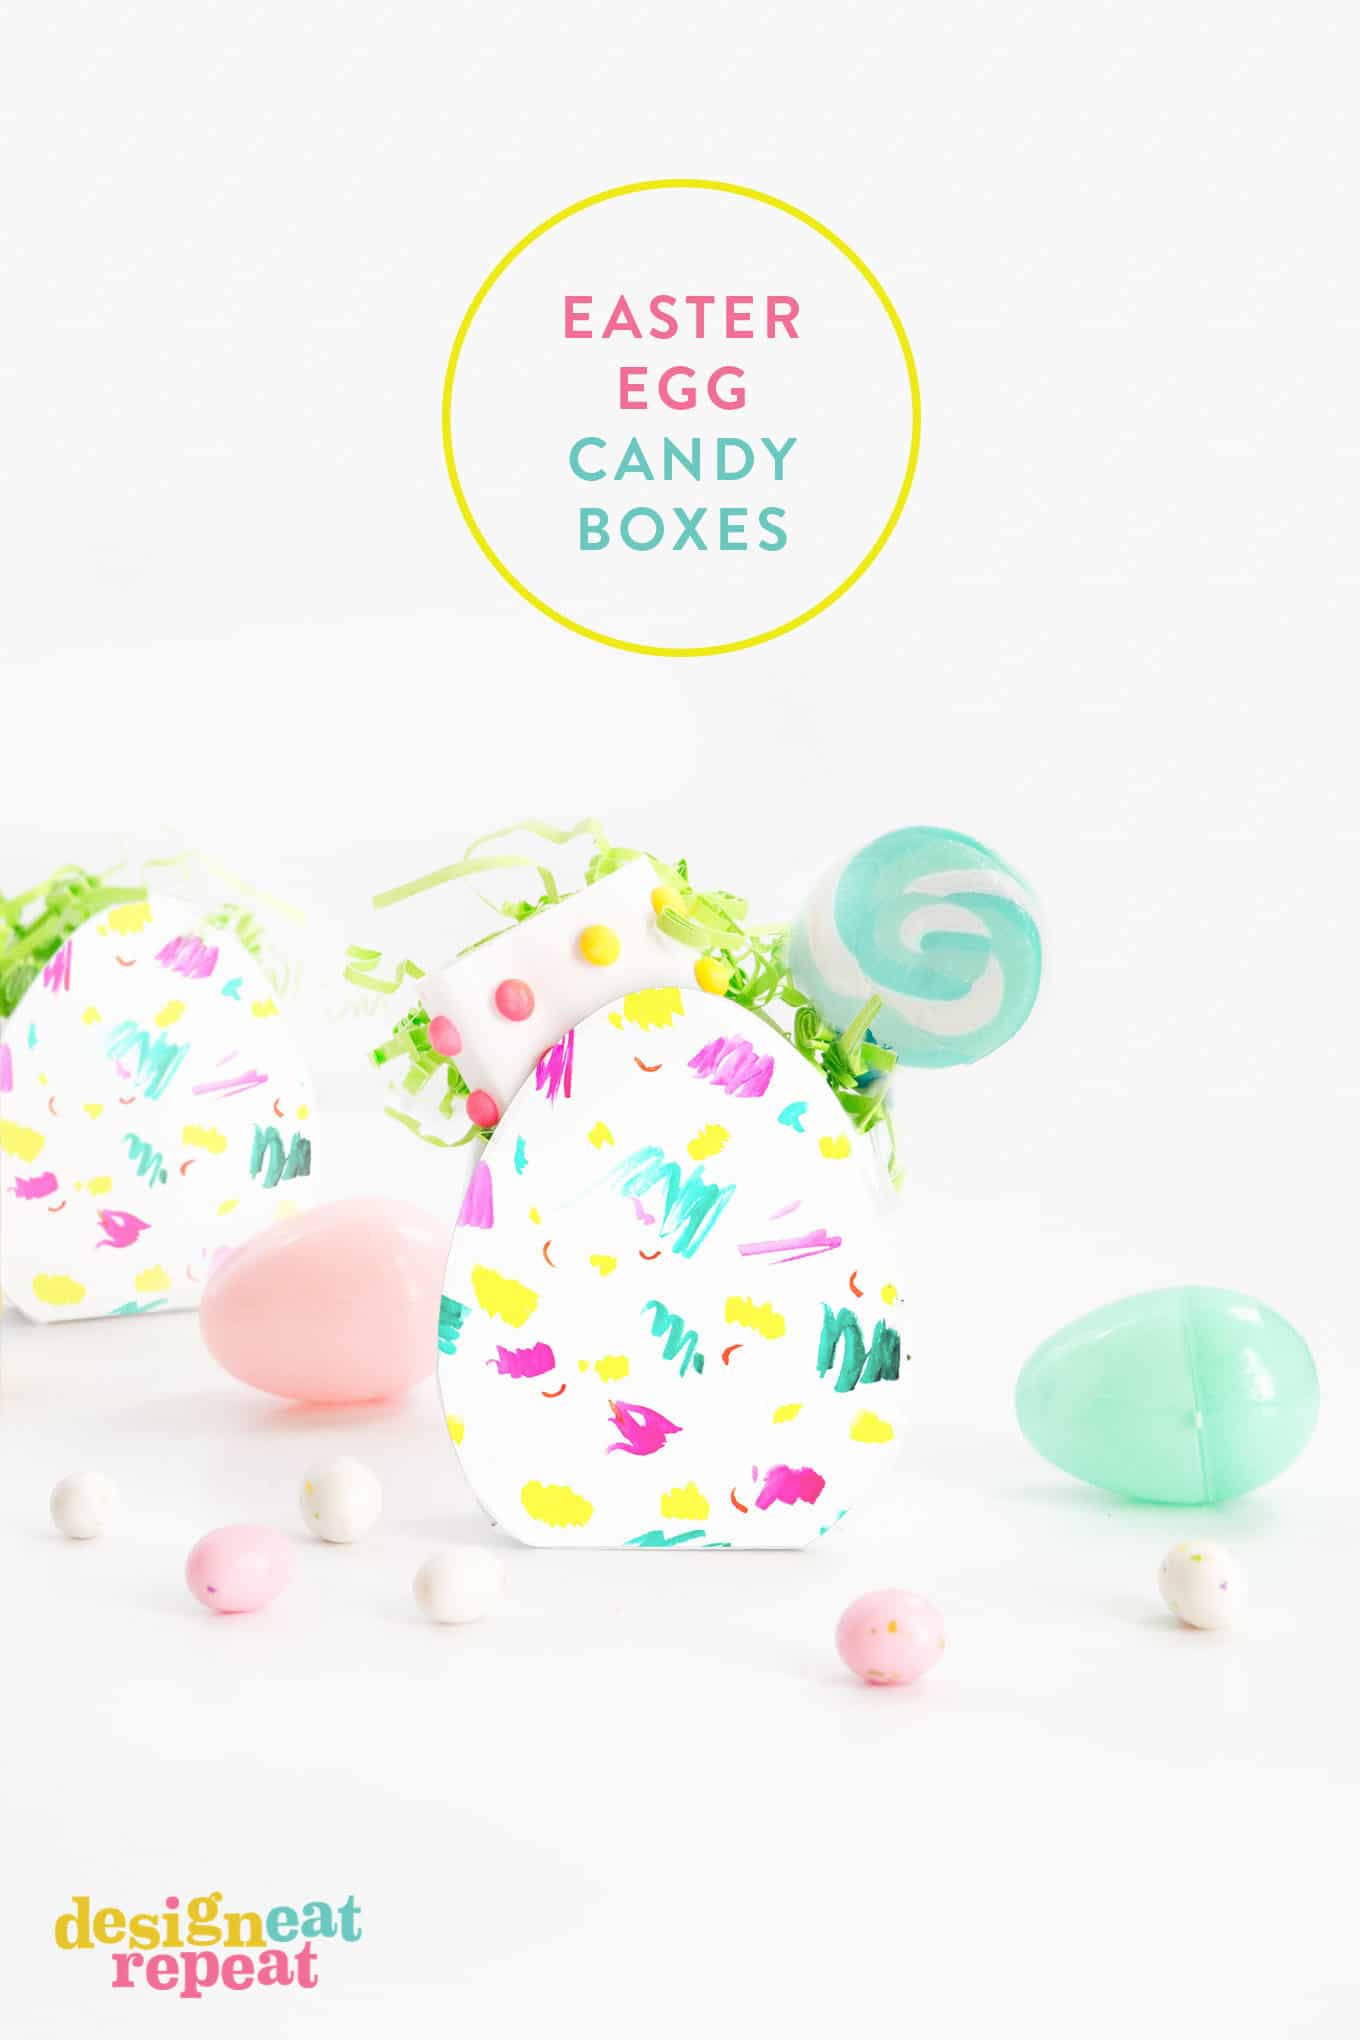 Download these bright & colorful Easter Egg Candy Boxes for a fun way to gift treats & trinkets!